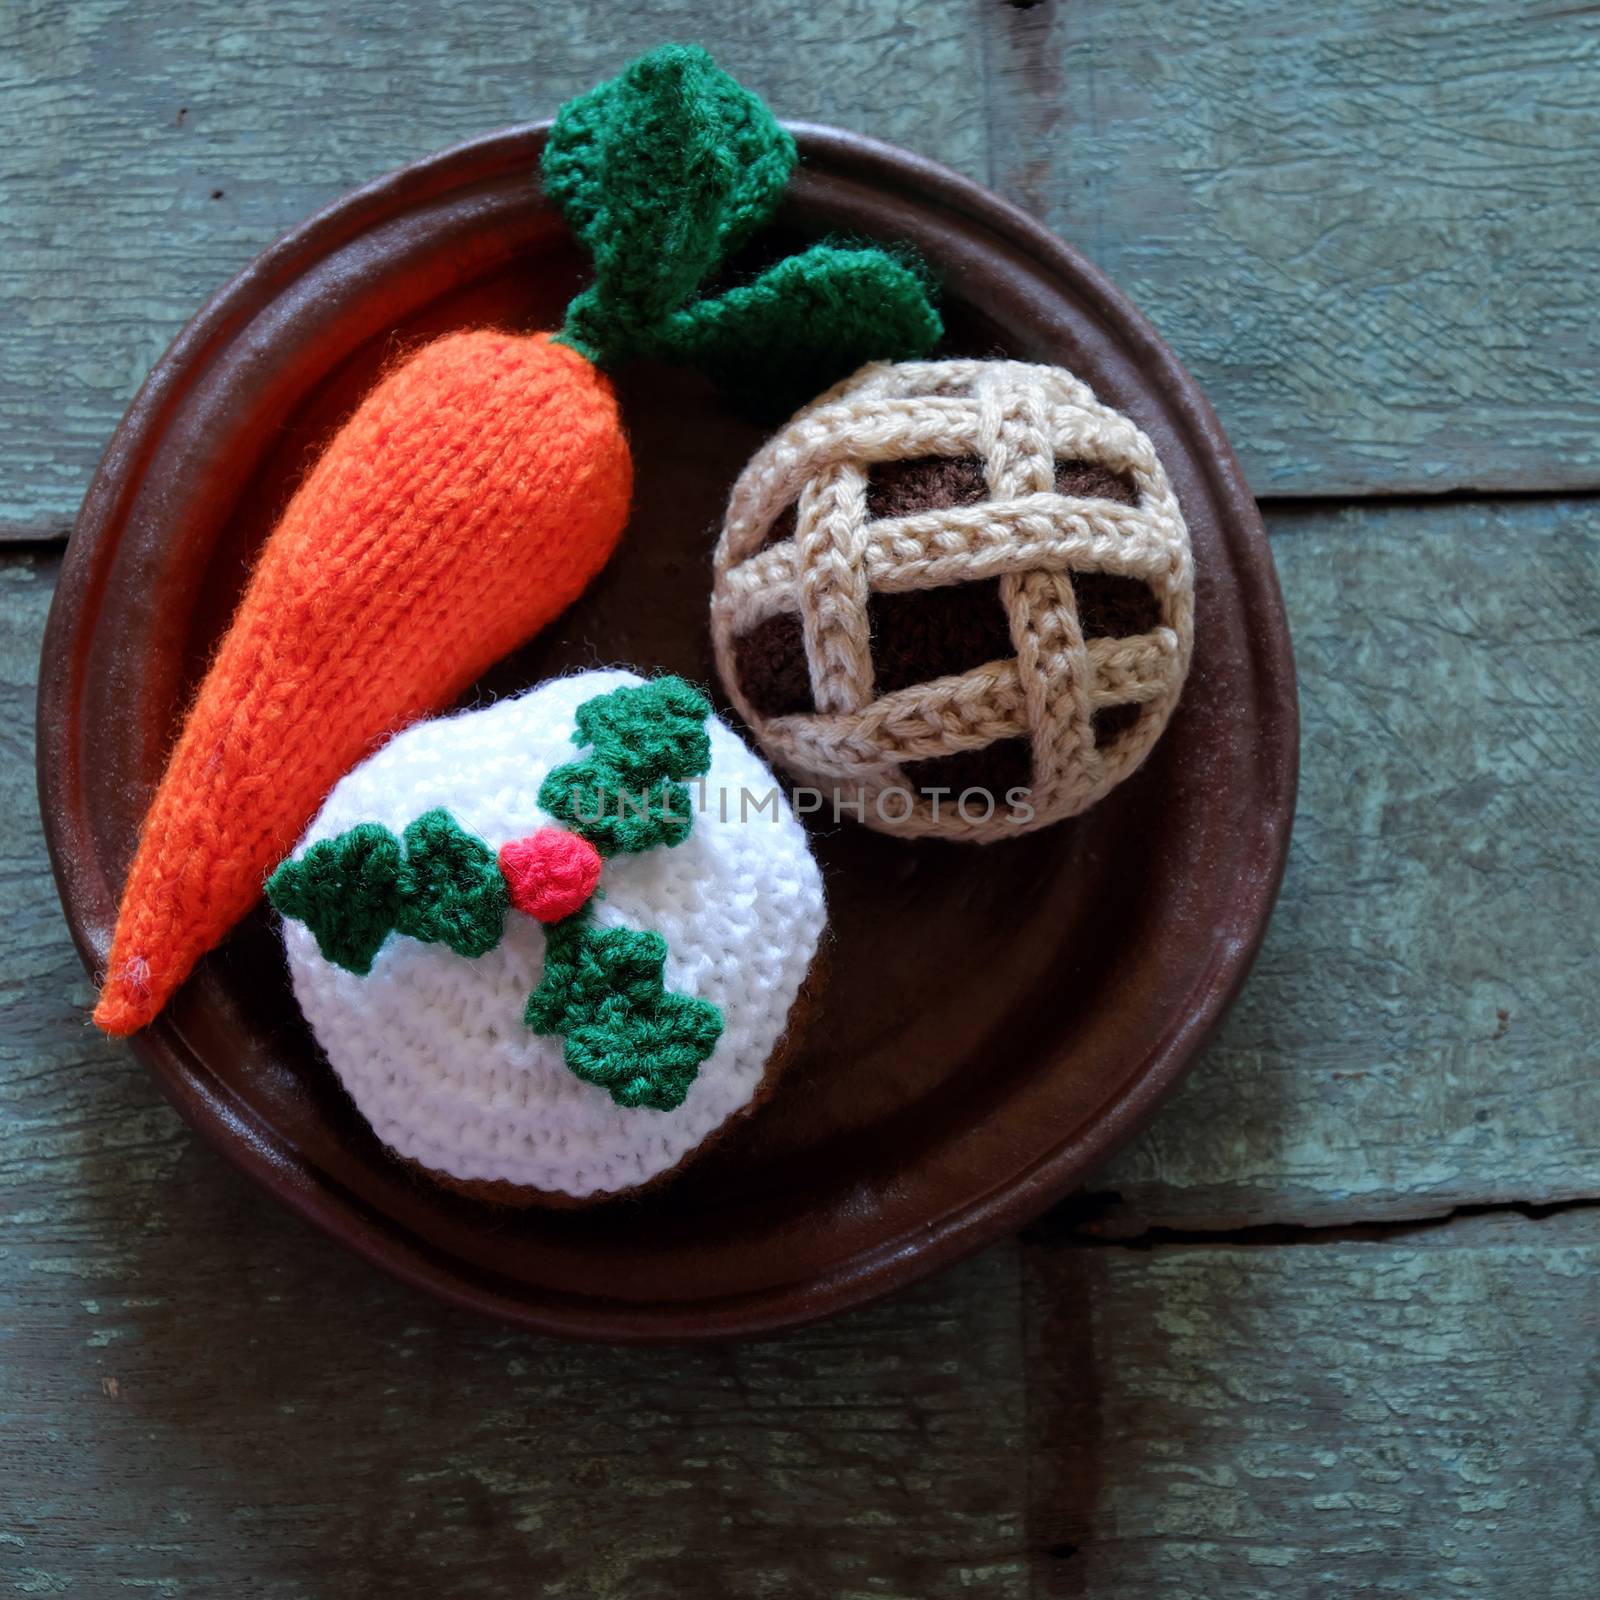 Group of food as carrot, mince pie, cupcake, meal to treat for santa claus and rudolph on christmas night, amazing xmas ornament handmade by knit from colorful yarn